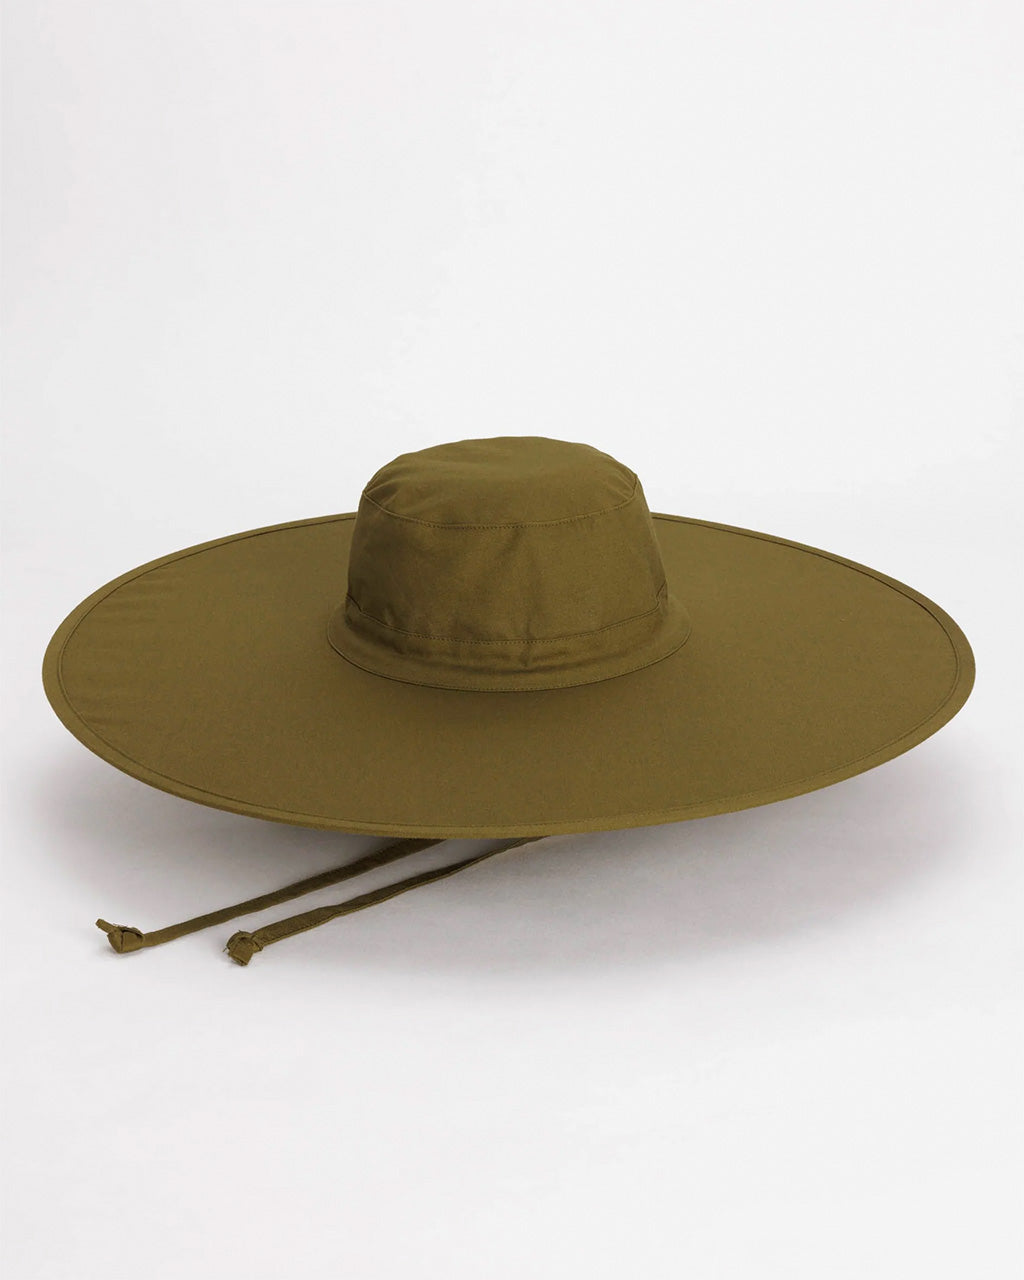 Packable Sun Hat: Organic Cotton, Adjustable, Perfect for Travel